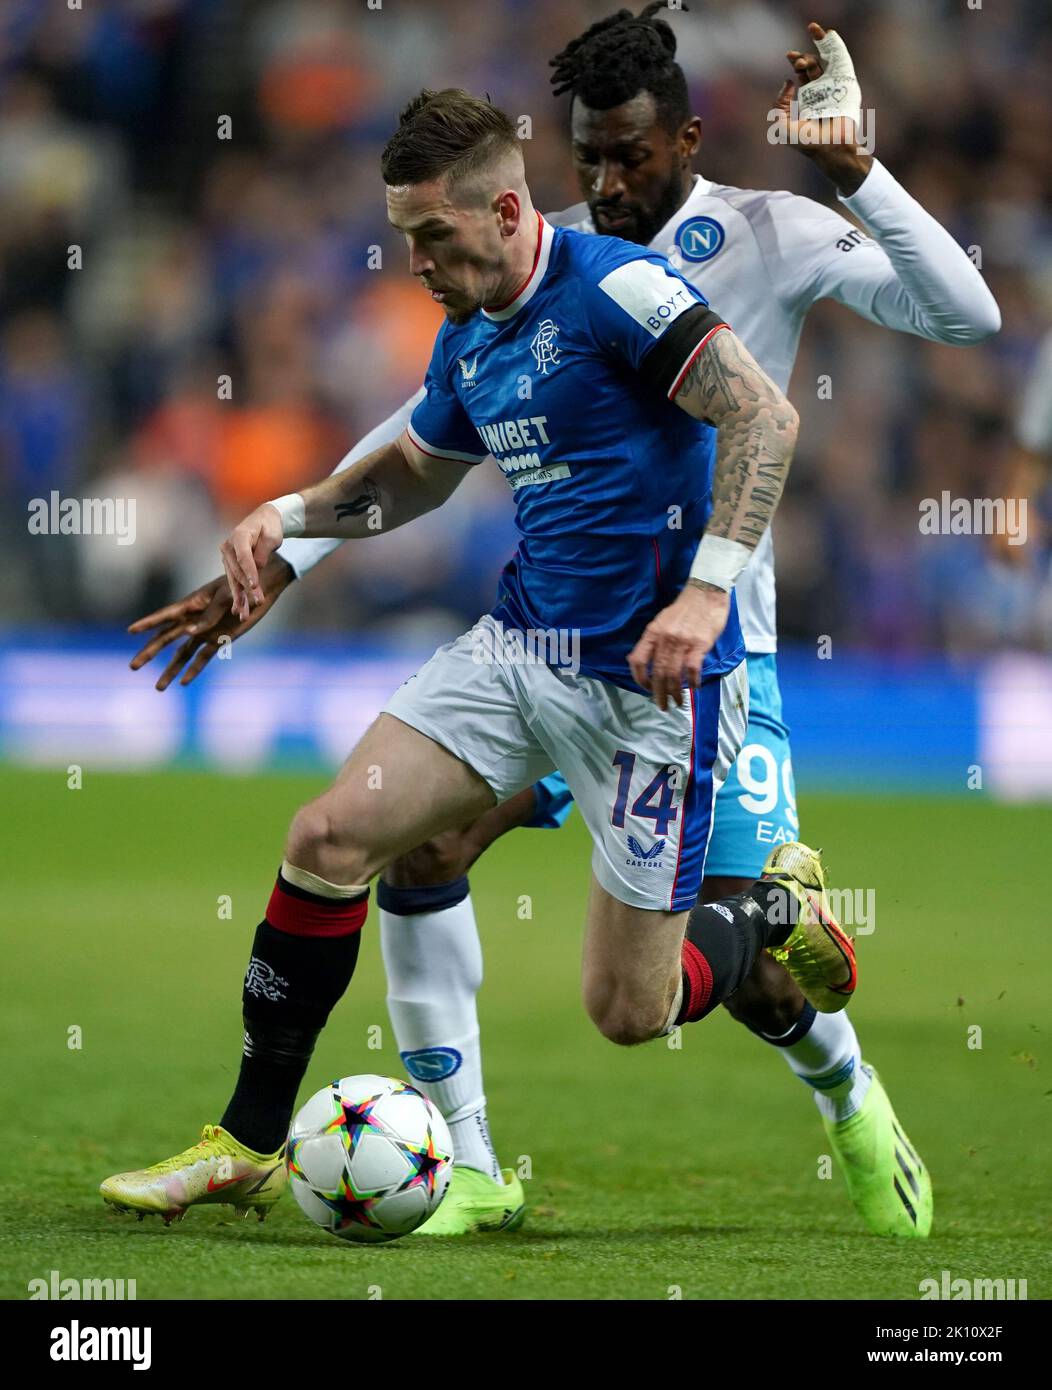 Rangers' Ryan Kent (left) and Napoli's Andre-Frank Zambo Anguissa in action during the UEFA Champions League Group A match at Ibrox Stadium, Glasgow. Picture date: Wednesday September 14, 2022. Stock Photo